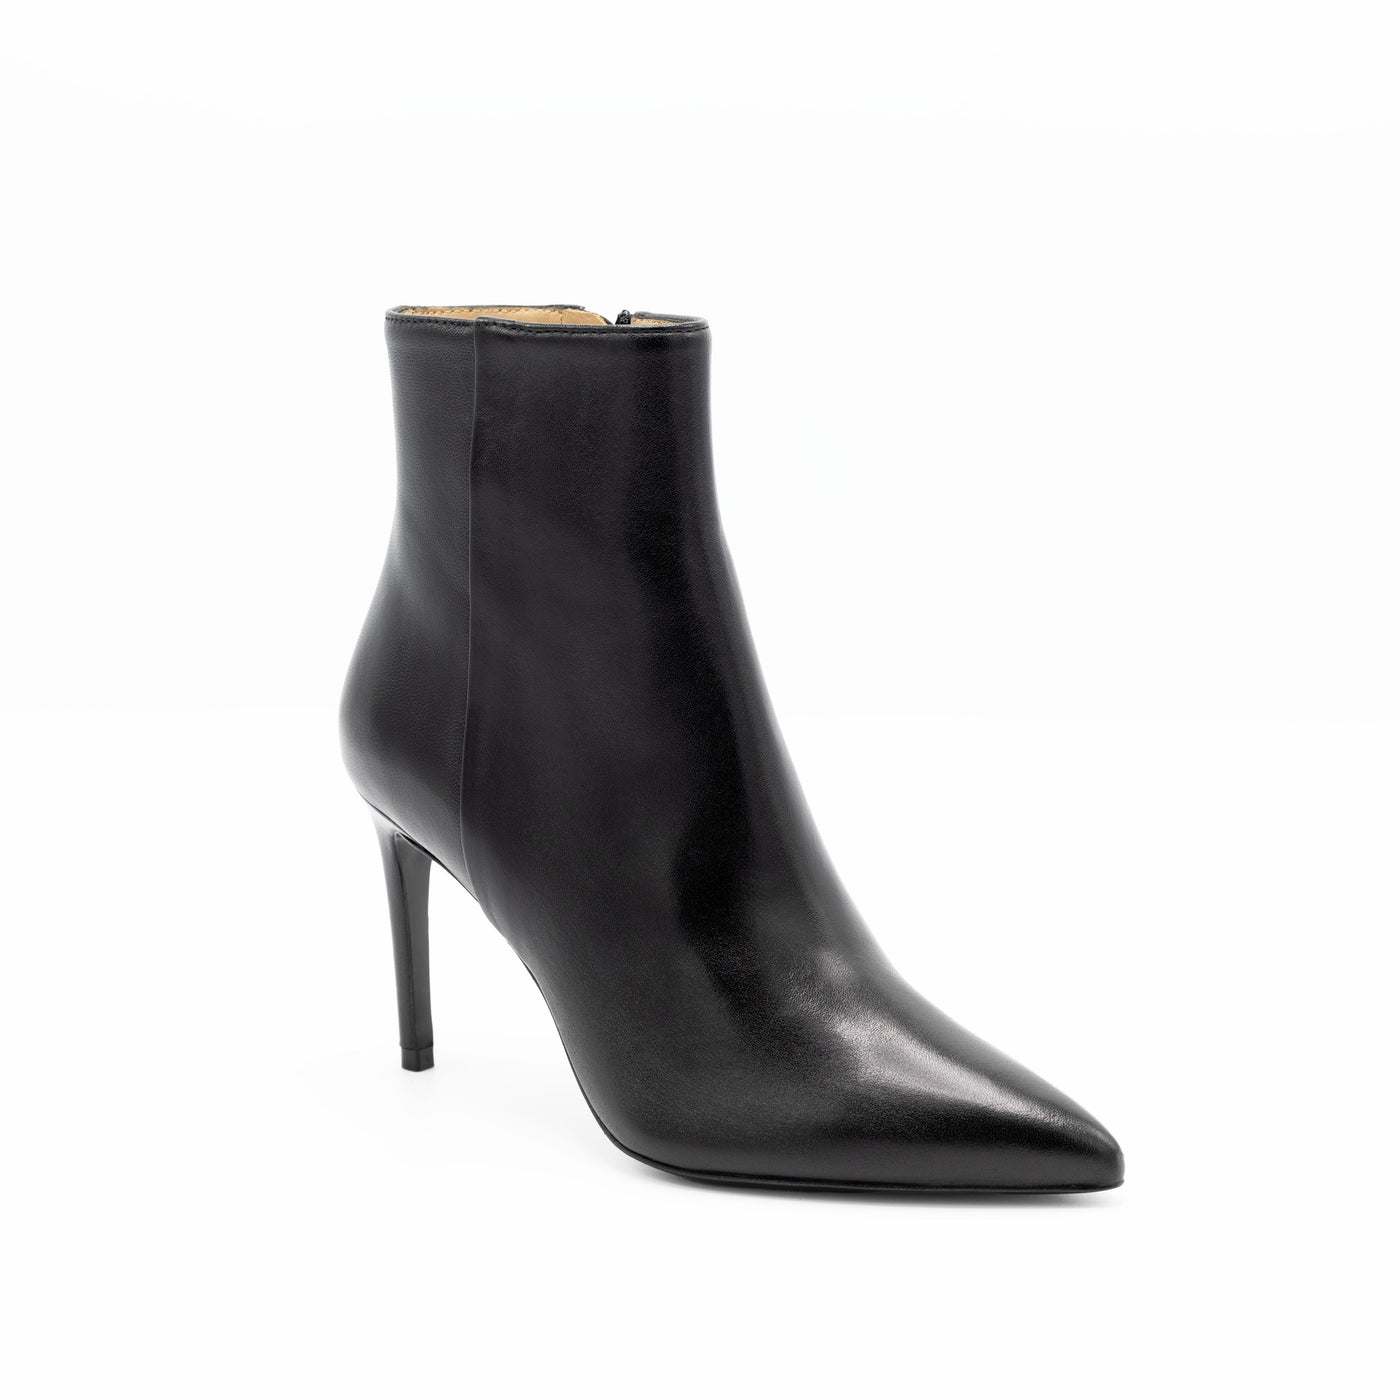 Black Leather Stiletto Ankle Boots